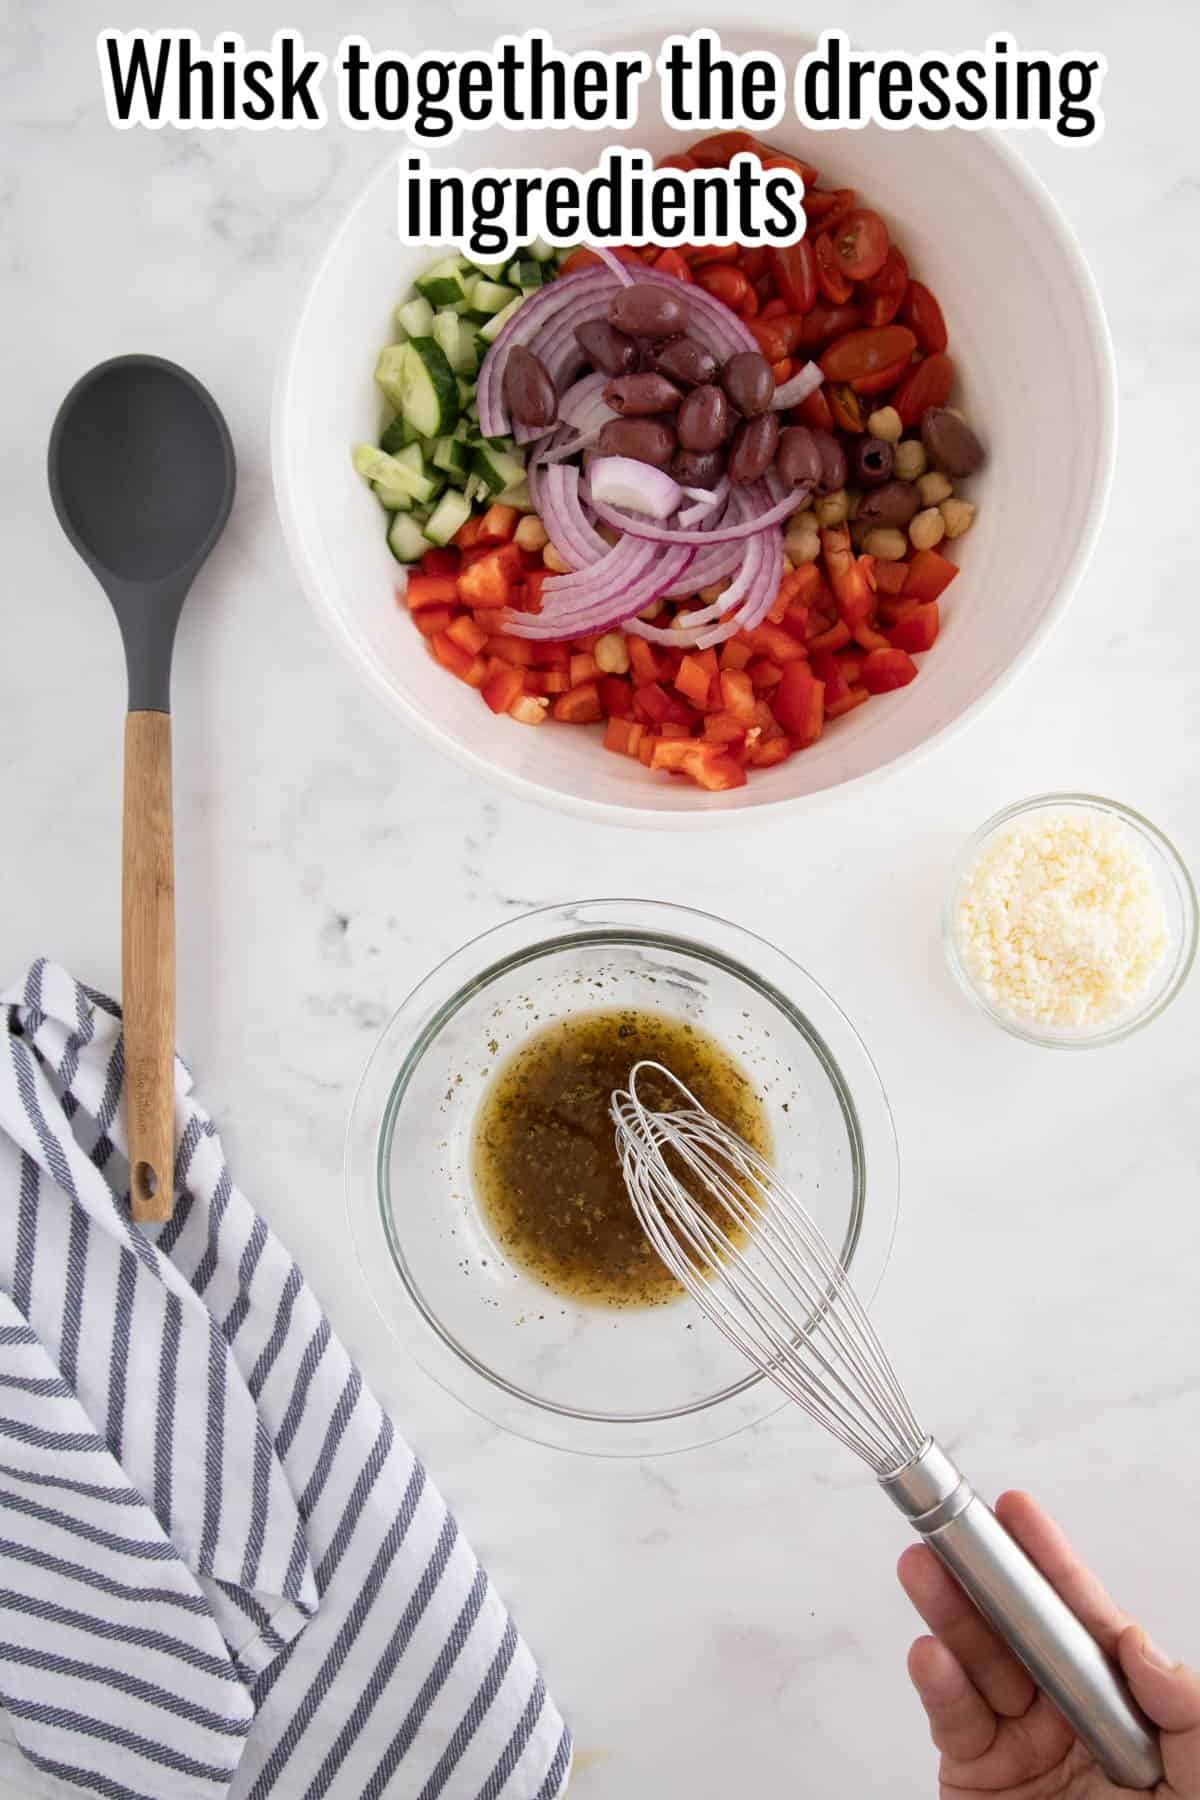 Bowl with salad ingredients, a spoon and another bowl with dressing being whisked together.